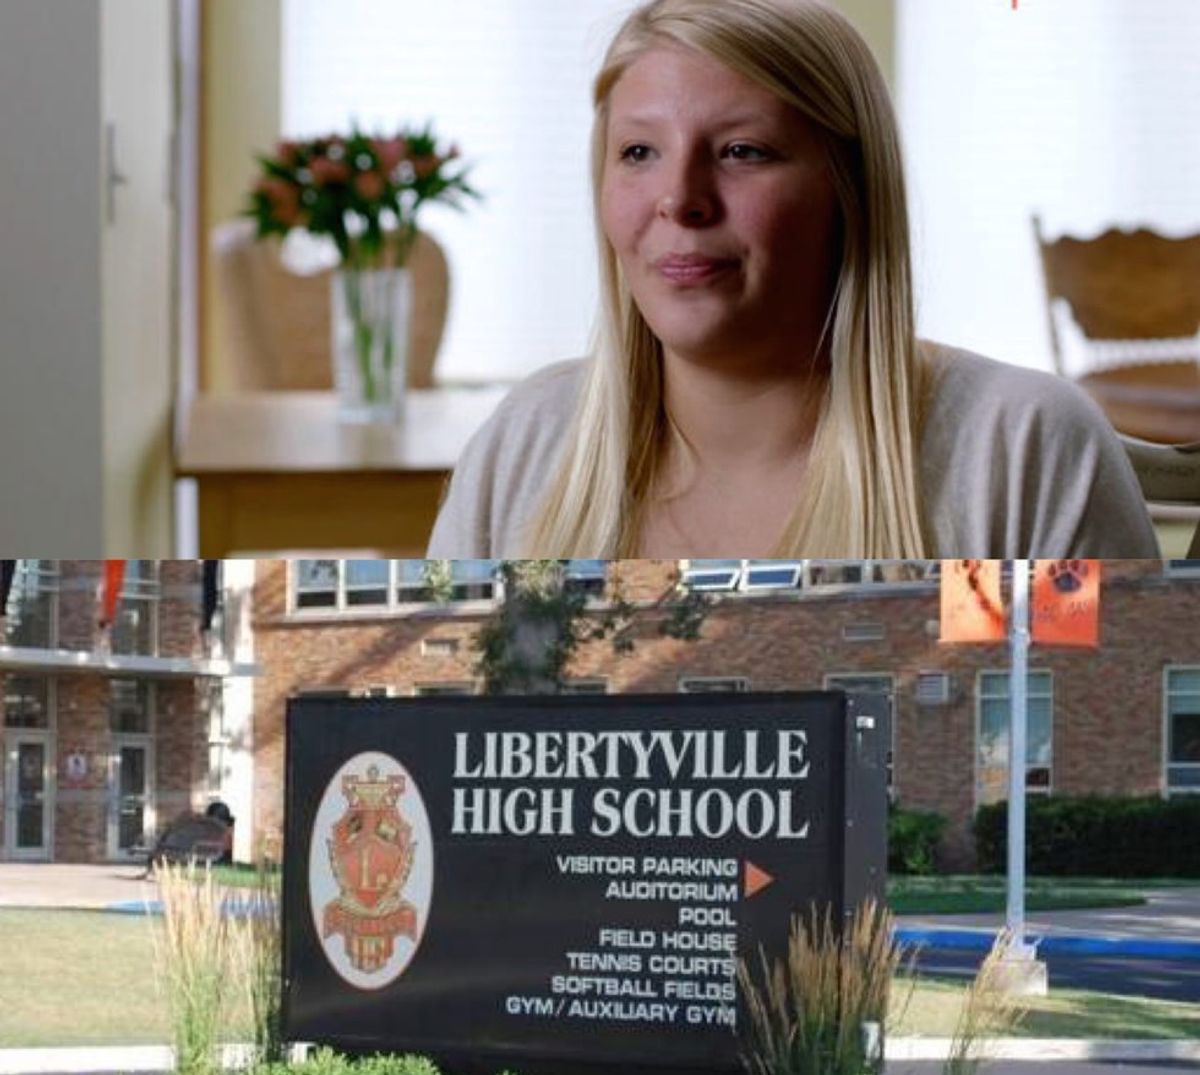 A Response To Rebecca Dabrowski, Libertyville High School And The Game That Brought Awareness To Sexual Assault In Our Town